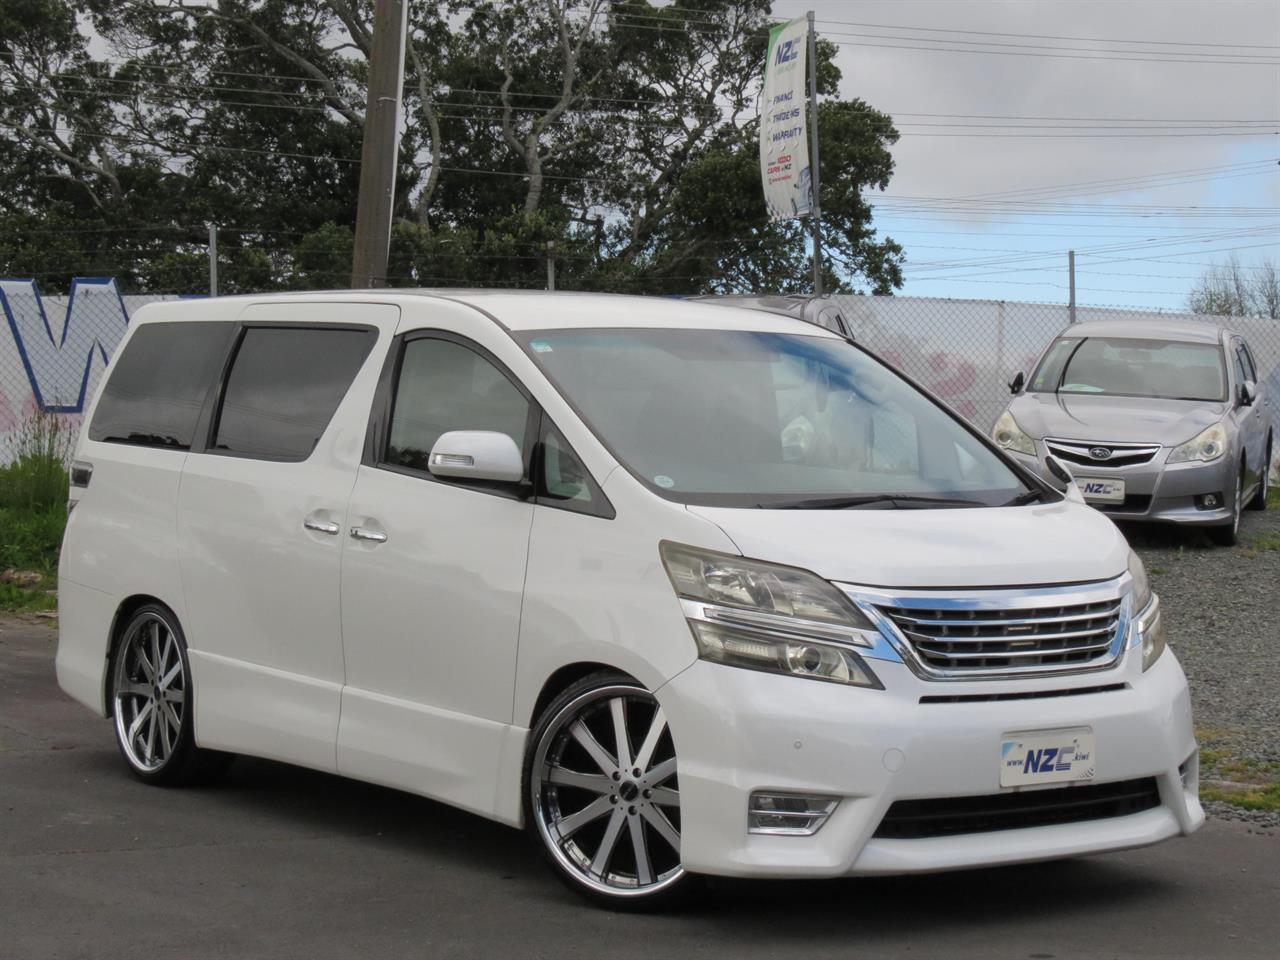 NZC 2010 Toyota VELLFIRE just arrived to Auckland